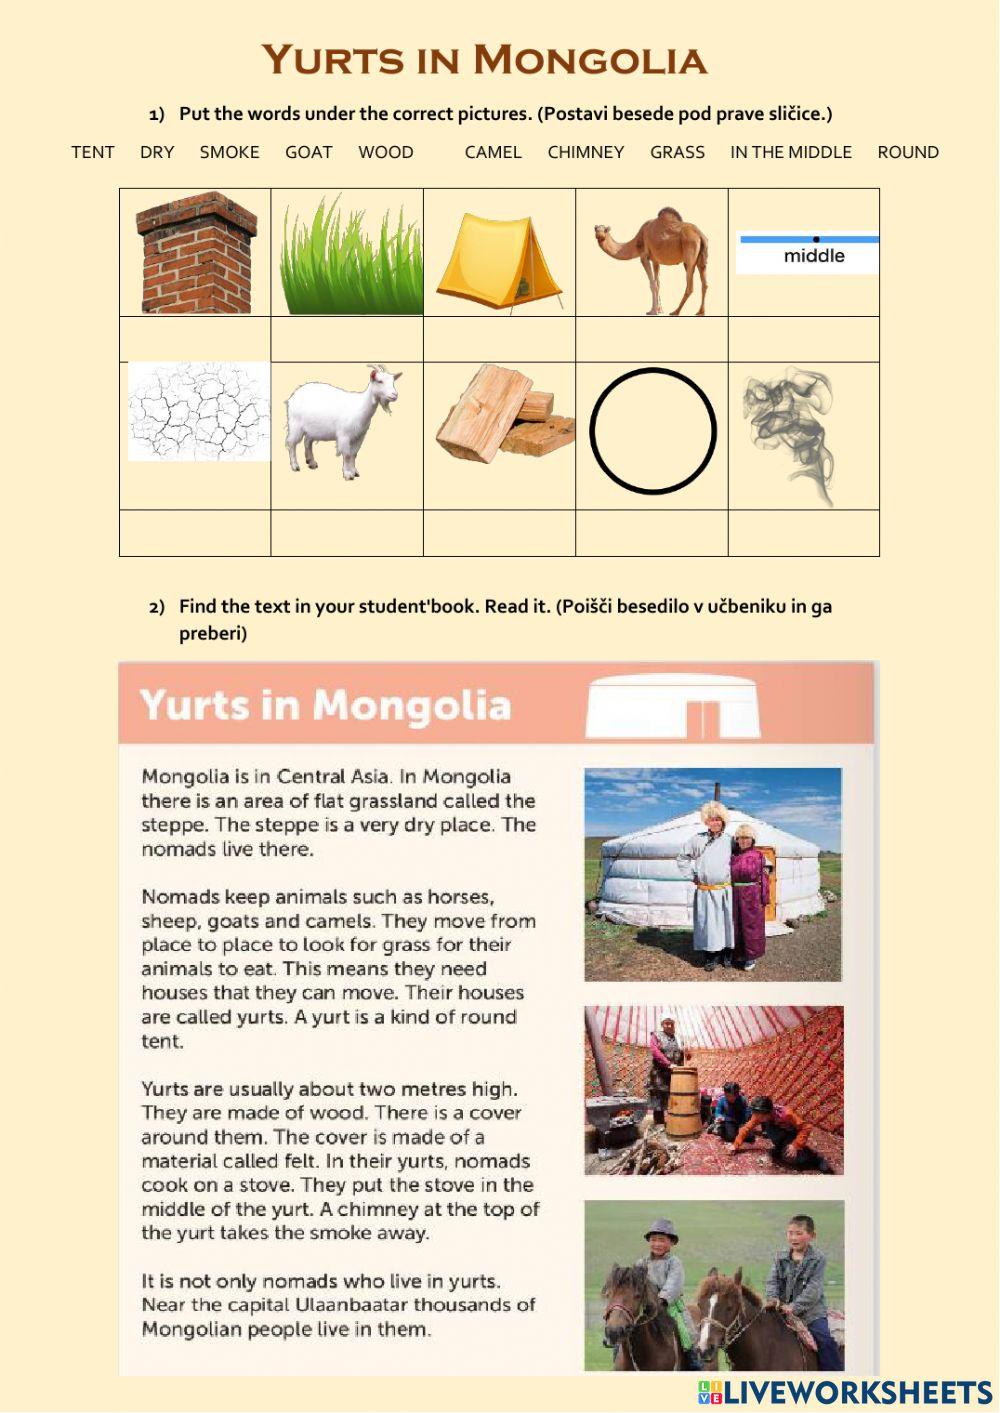 SuperMinds 2 - Yurts in Mongolia